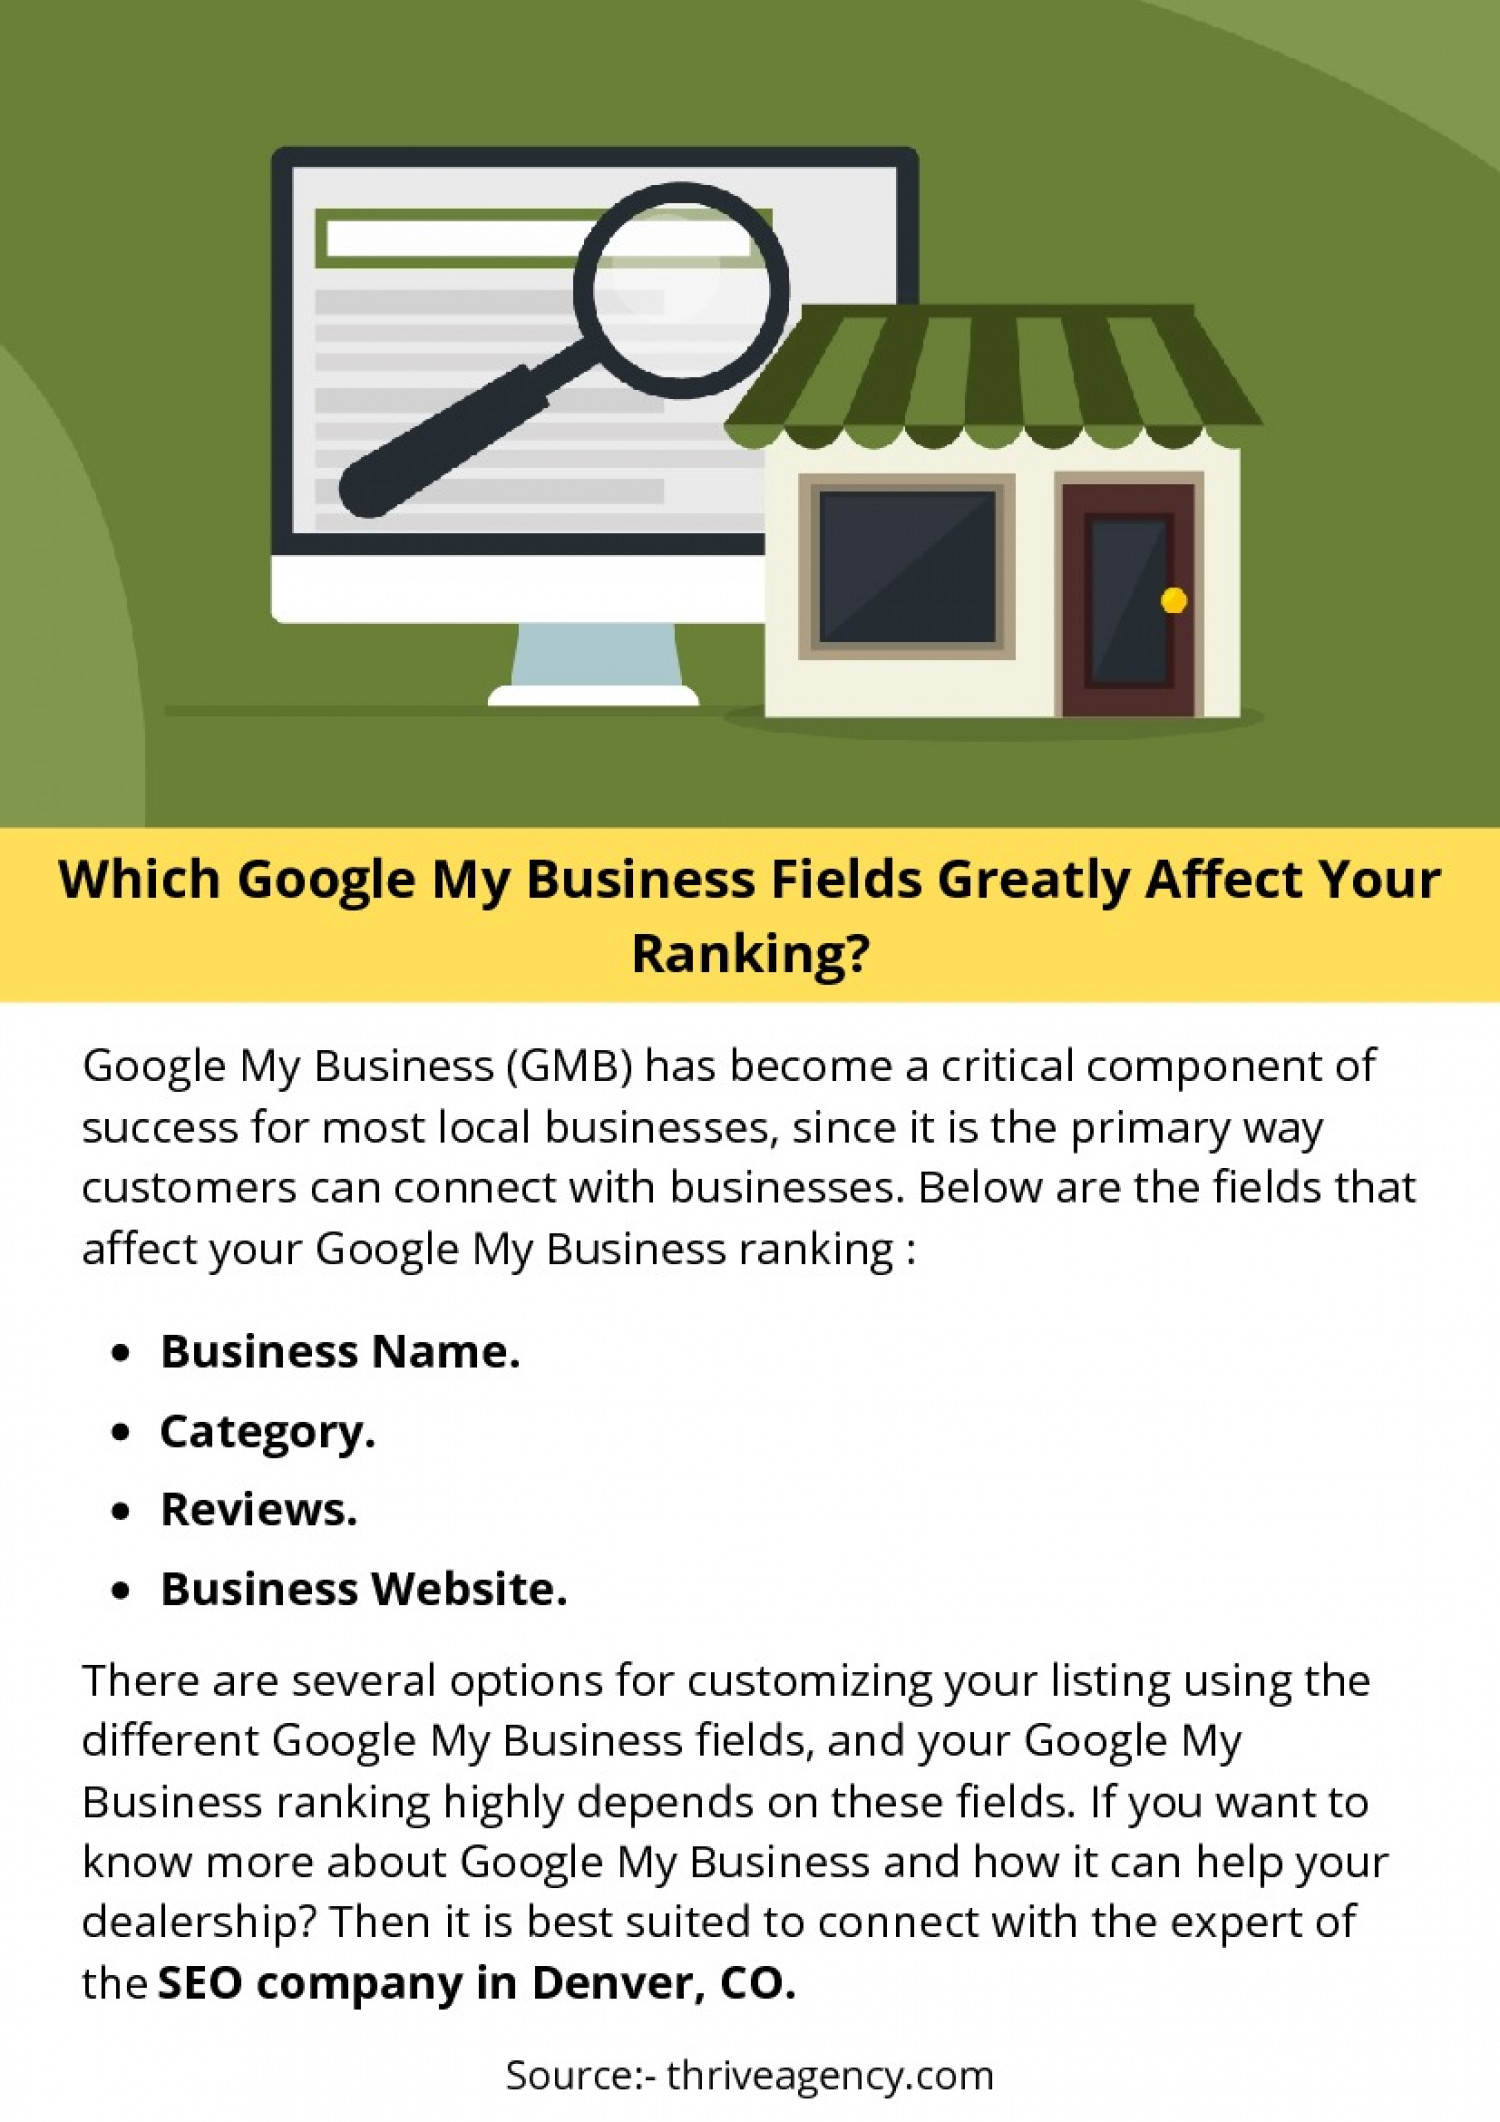 Which Google My Business Fields Greatly Affect Your Ranking? Infographic